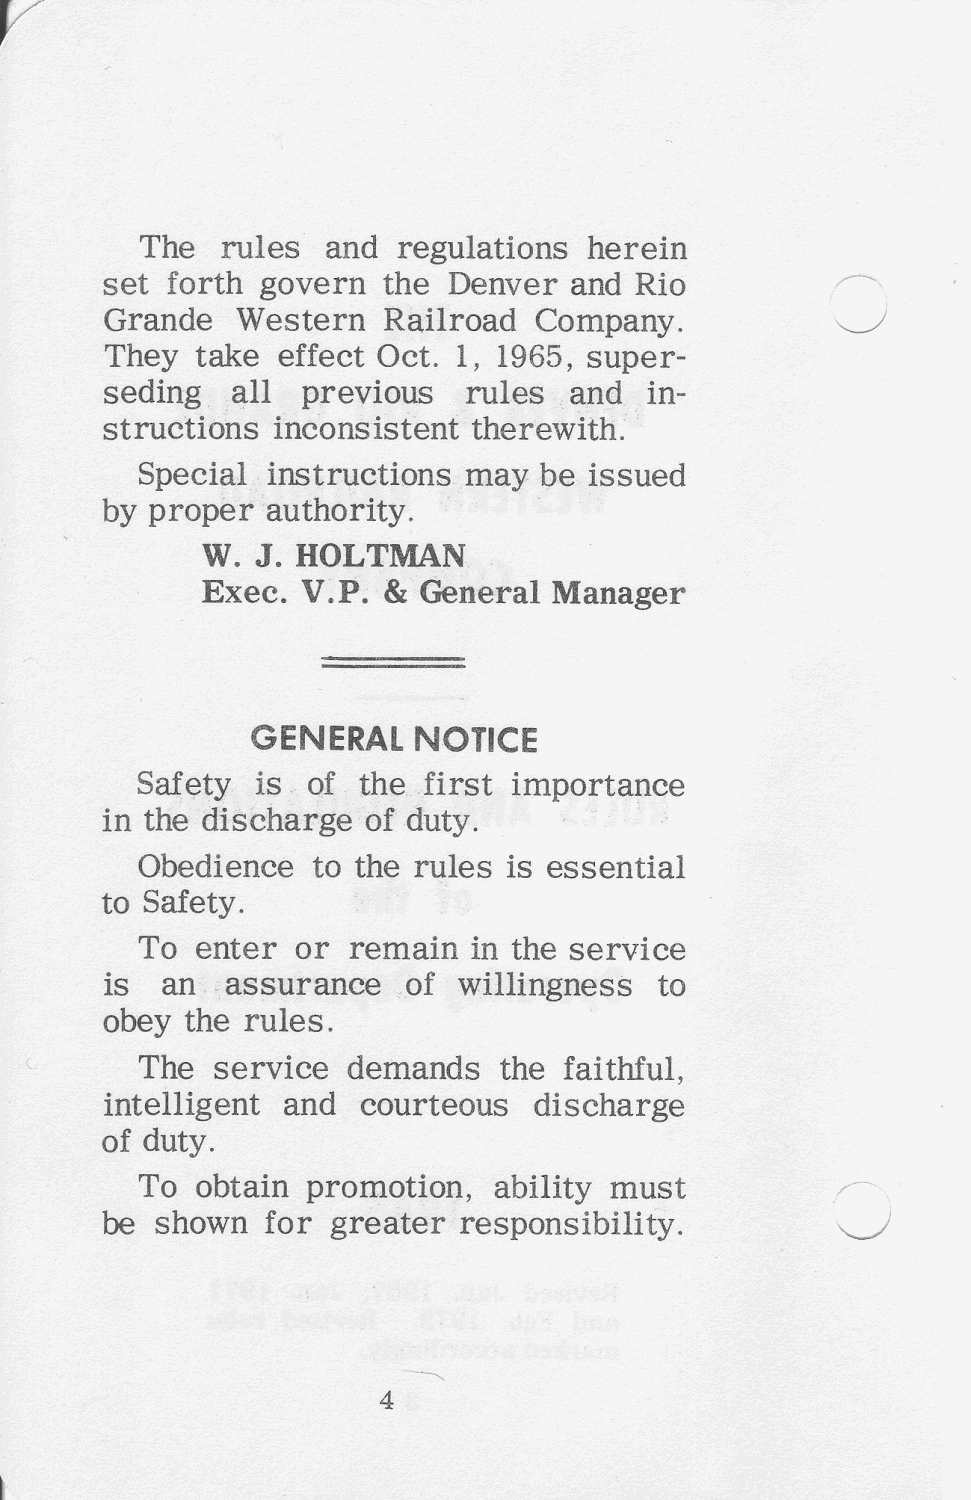 drgw_rules_1965_p004.png